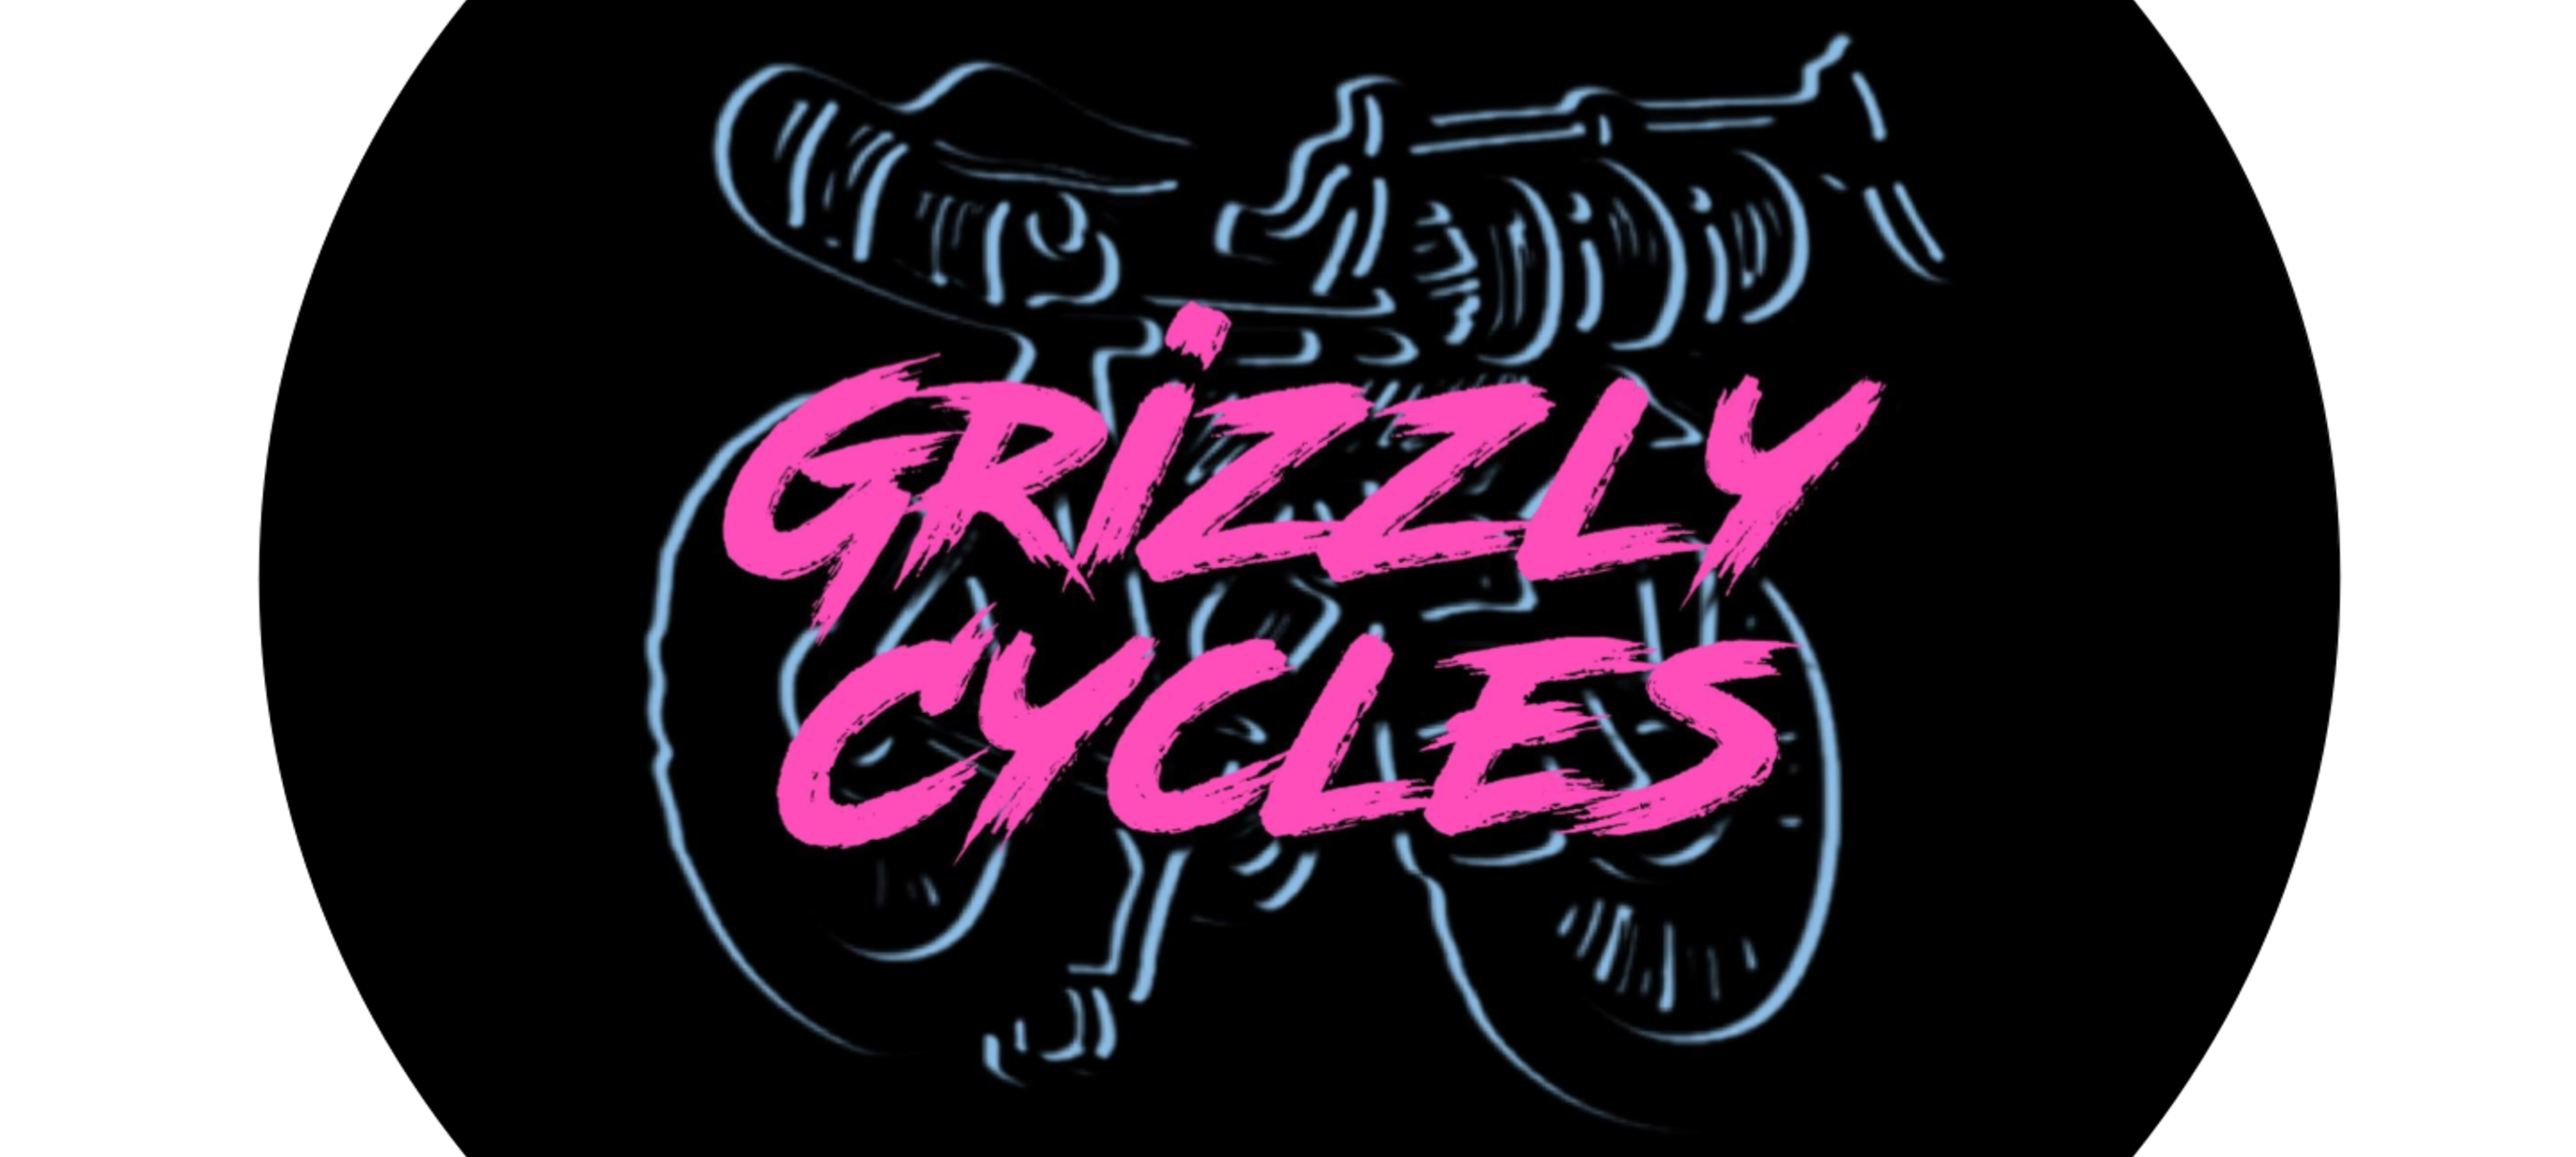 Grizzly June Newsletter